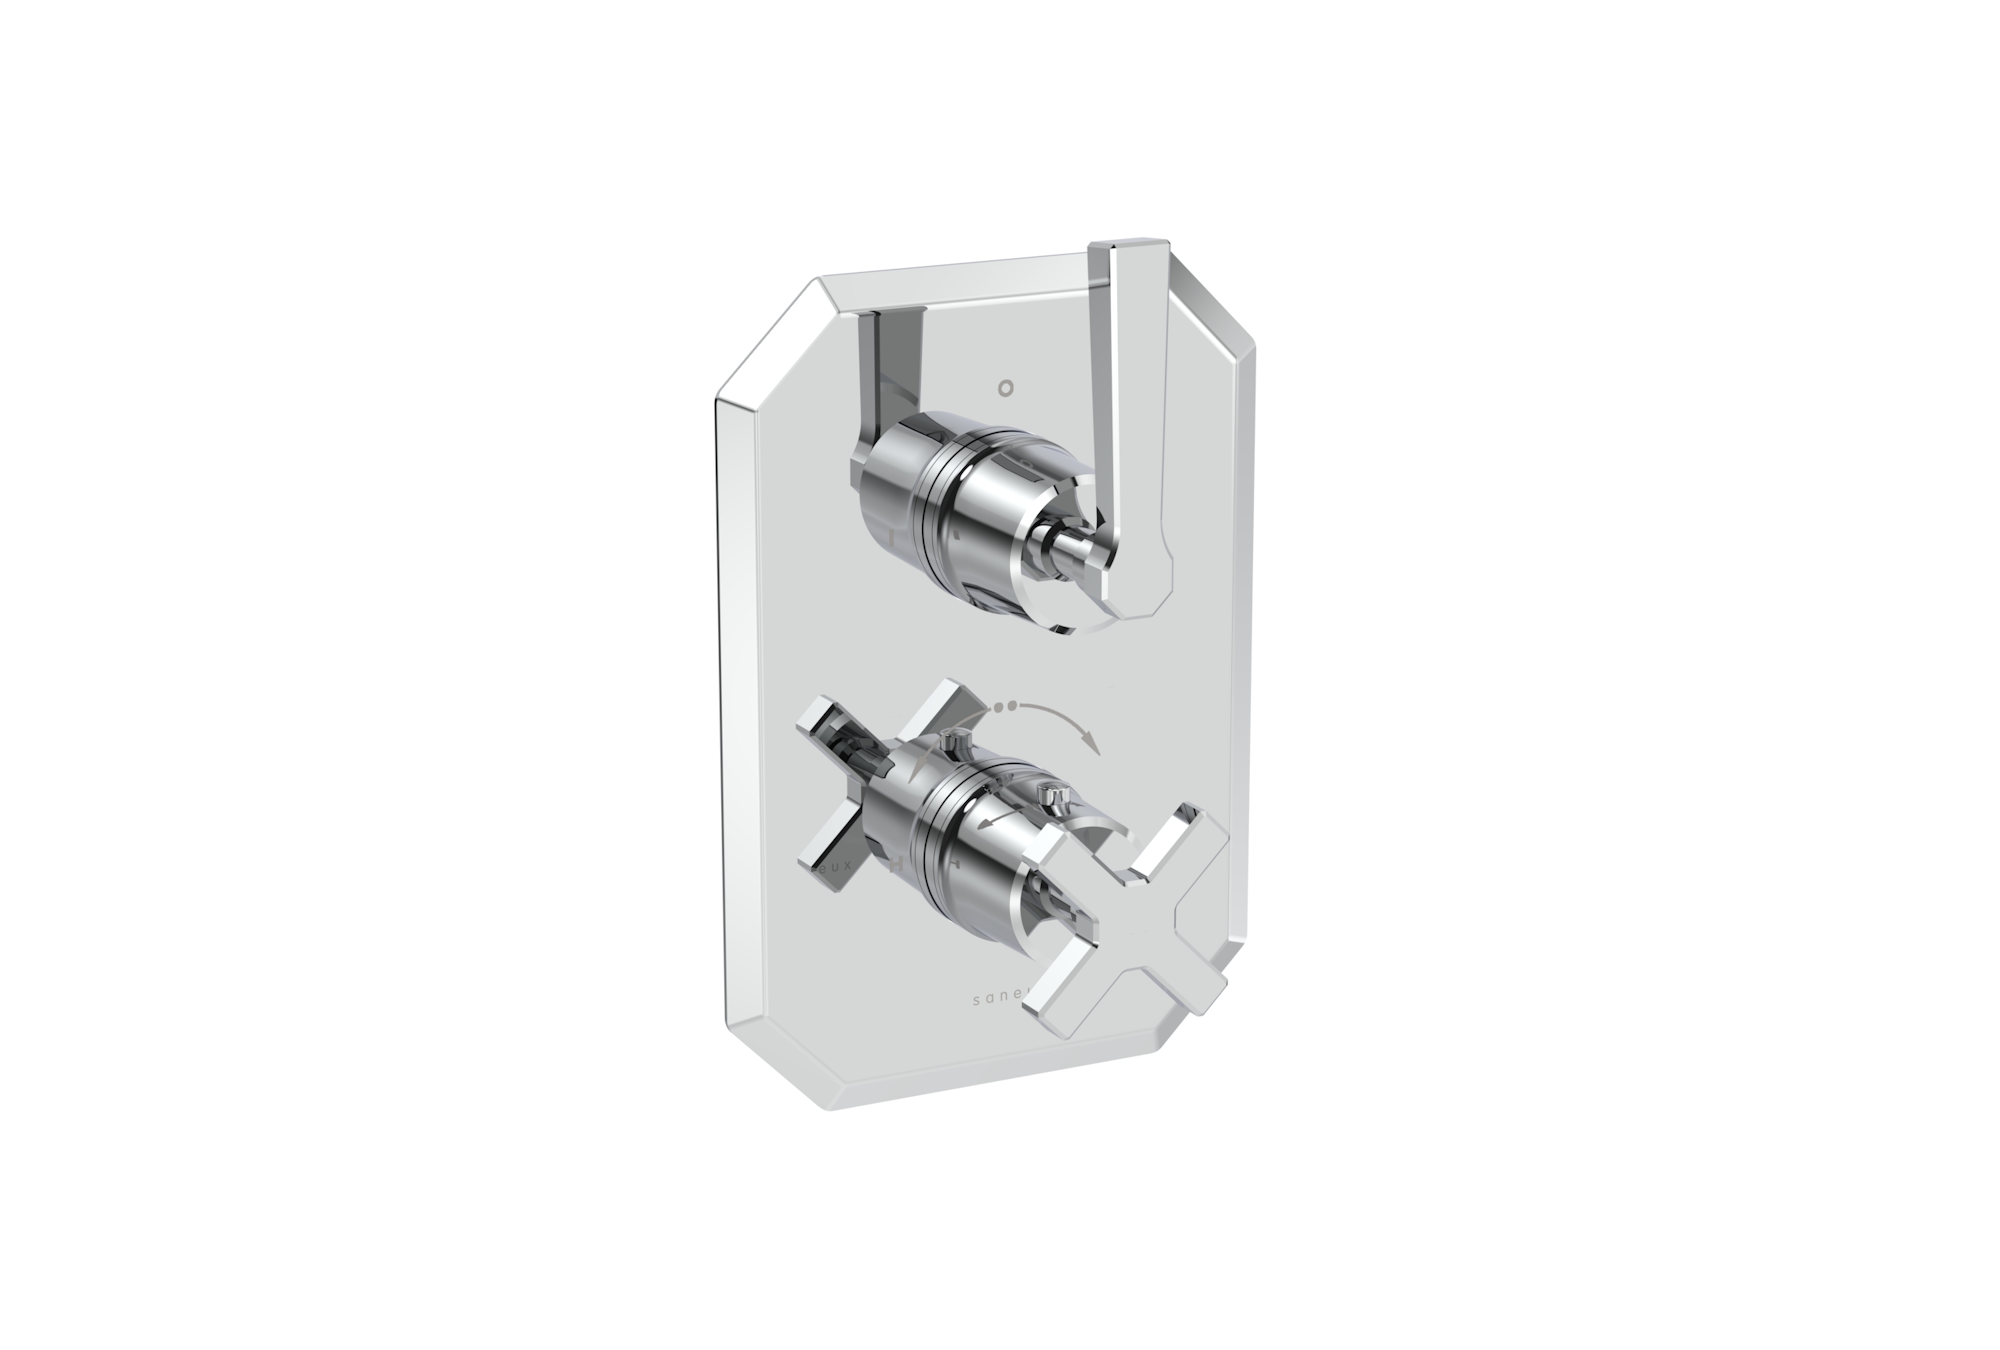 CROMWELL 2 way thermostatic shower valve kit with lever handles - Chrome